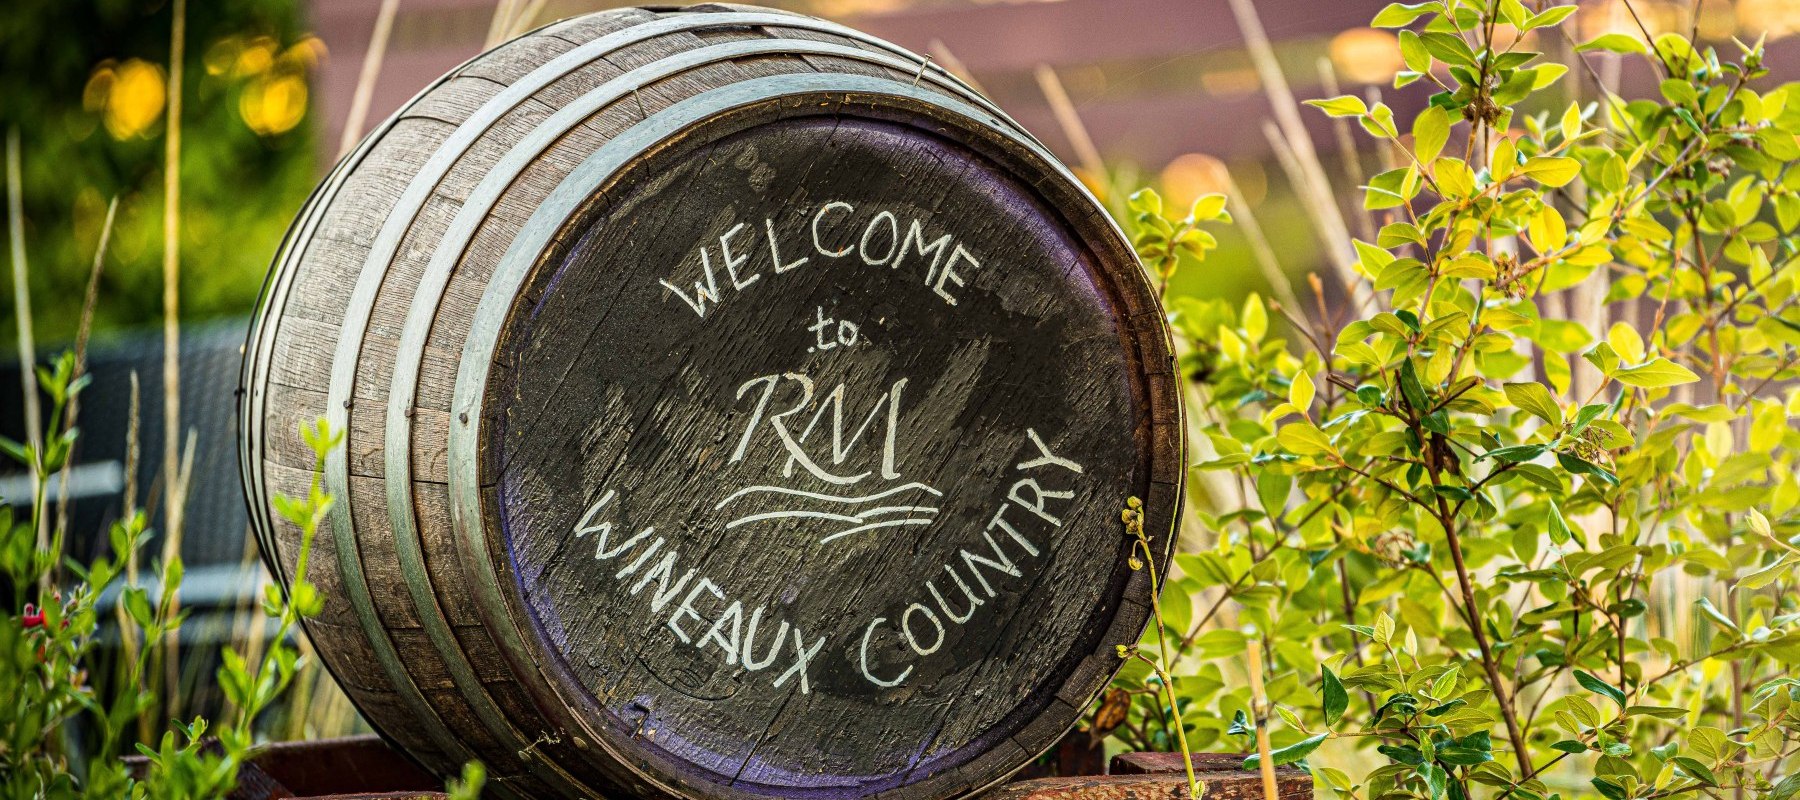 A close up of an old barrel in the tasting room garden that says “Welcome to Wineaux Country.”